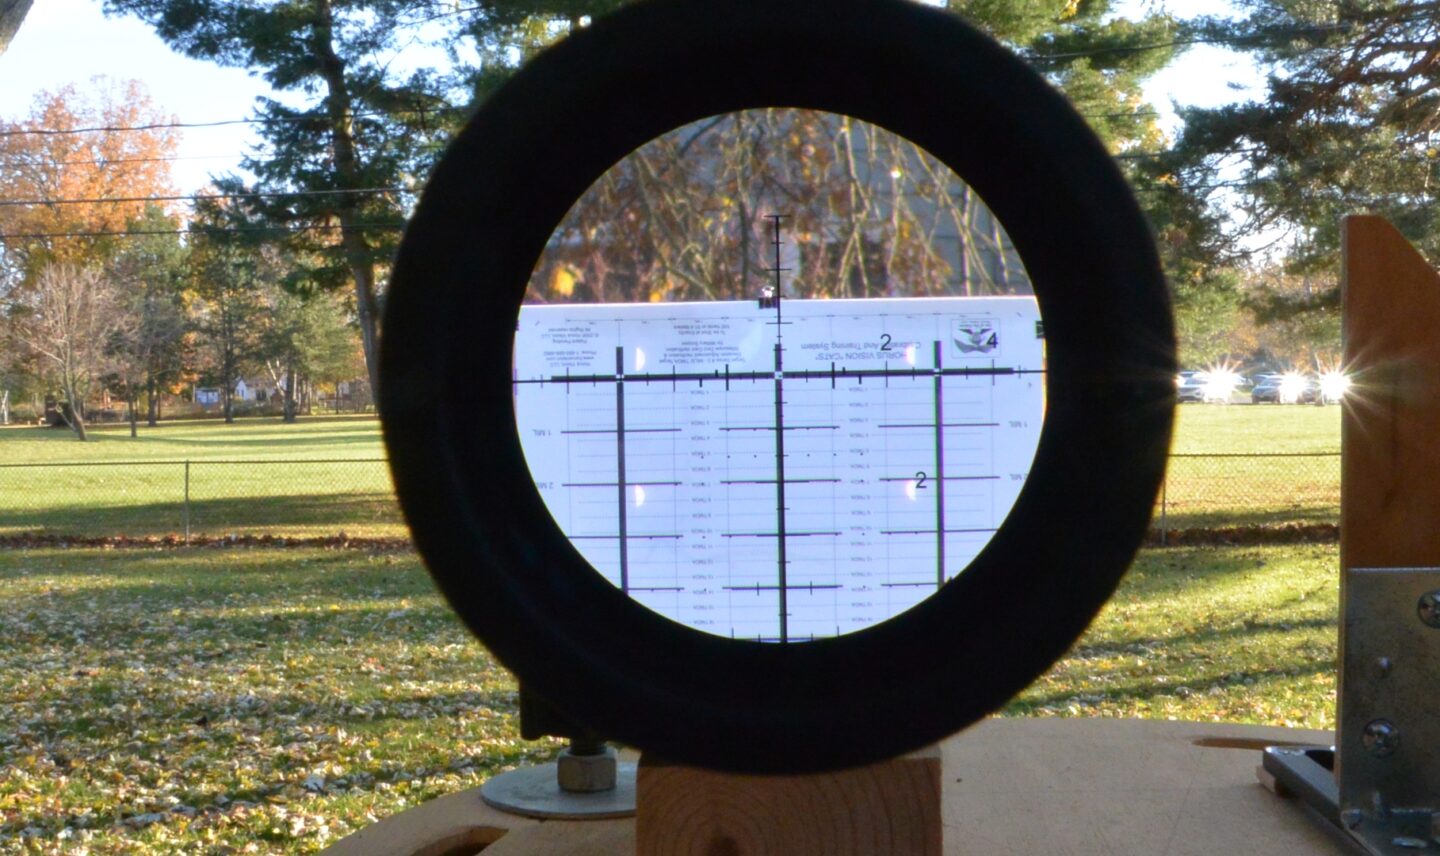 Bushnell Elite Tactical XRS3 6-36x56mm riflescope at 36x doing mechanical testing  using the Horus CATS tall target 